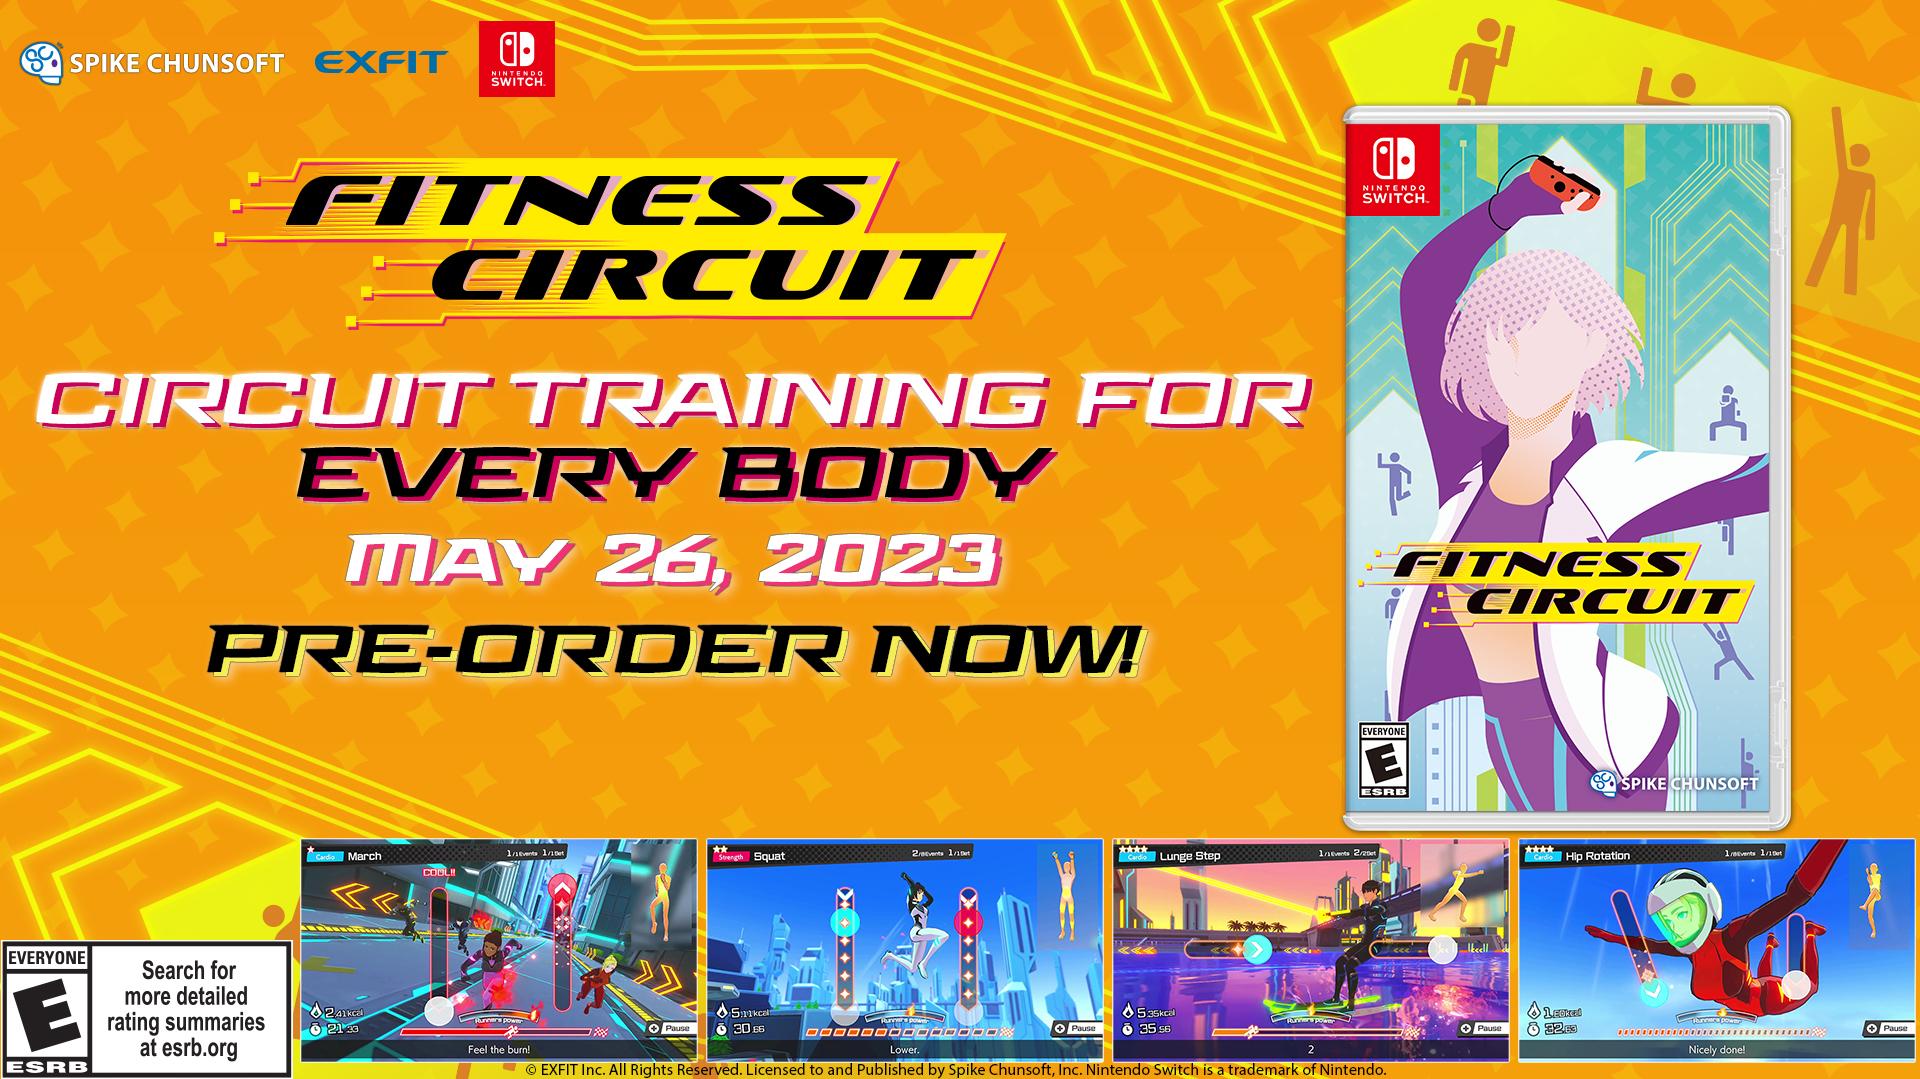 Spike Chunsoft Inc Announces Fitness Circuit for Nintendo Switch